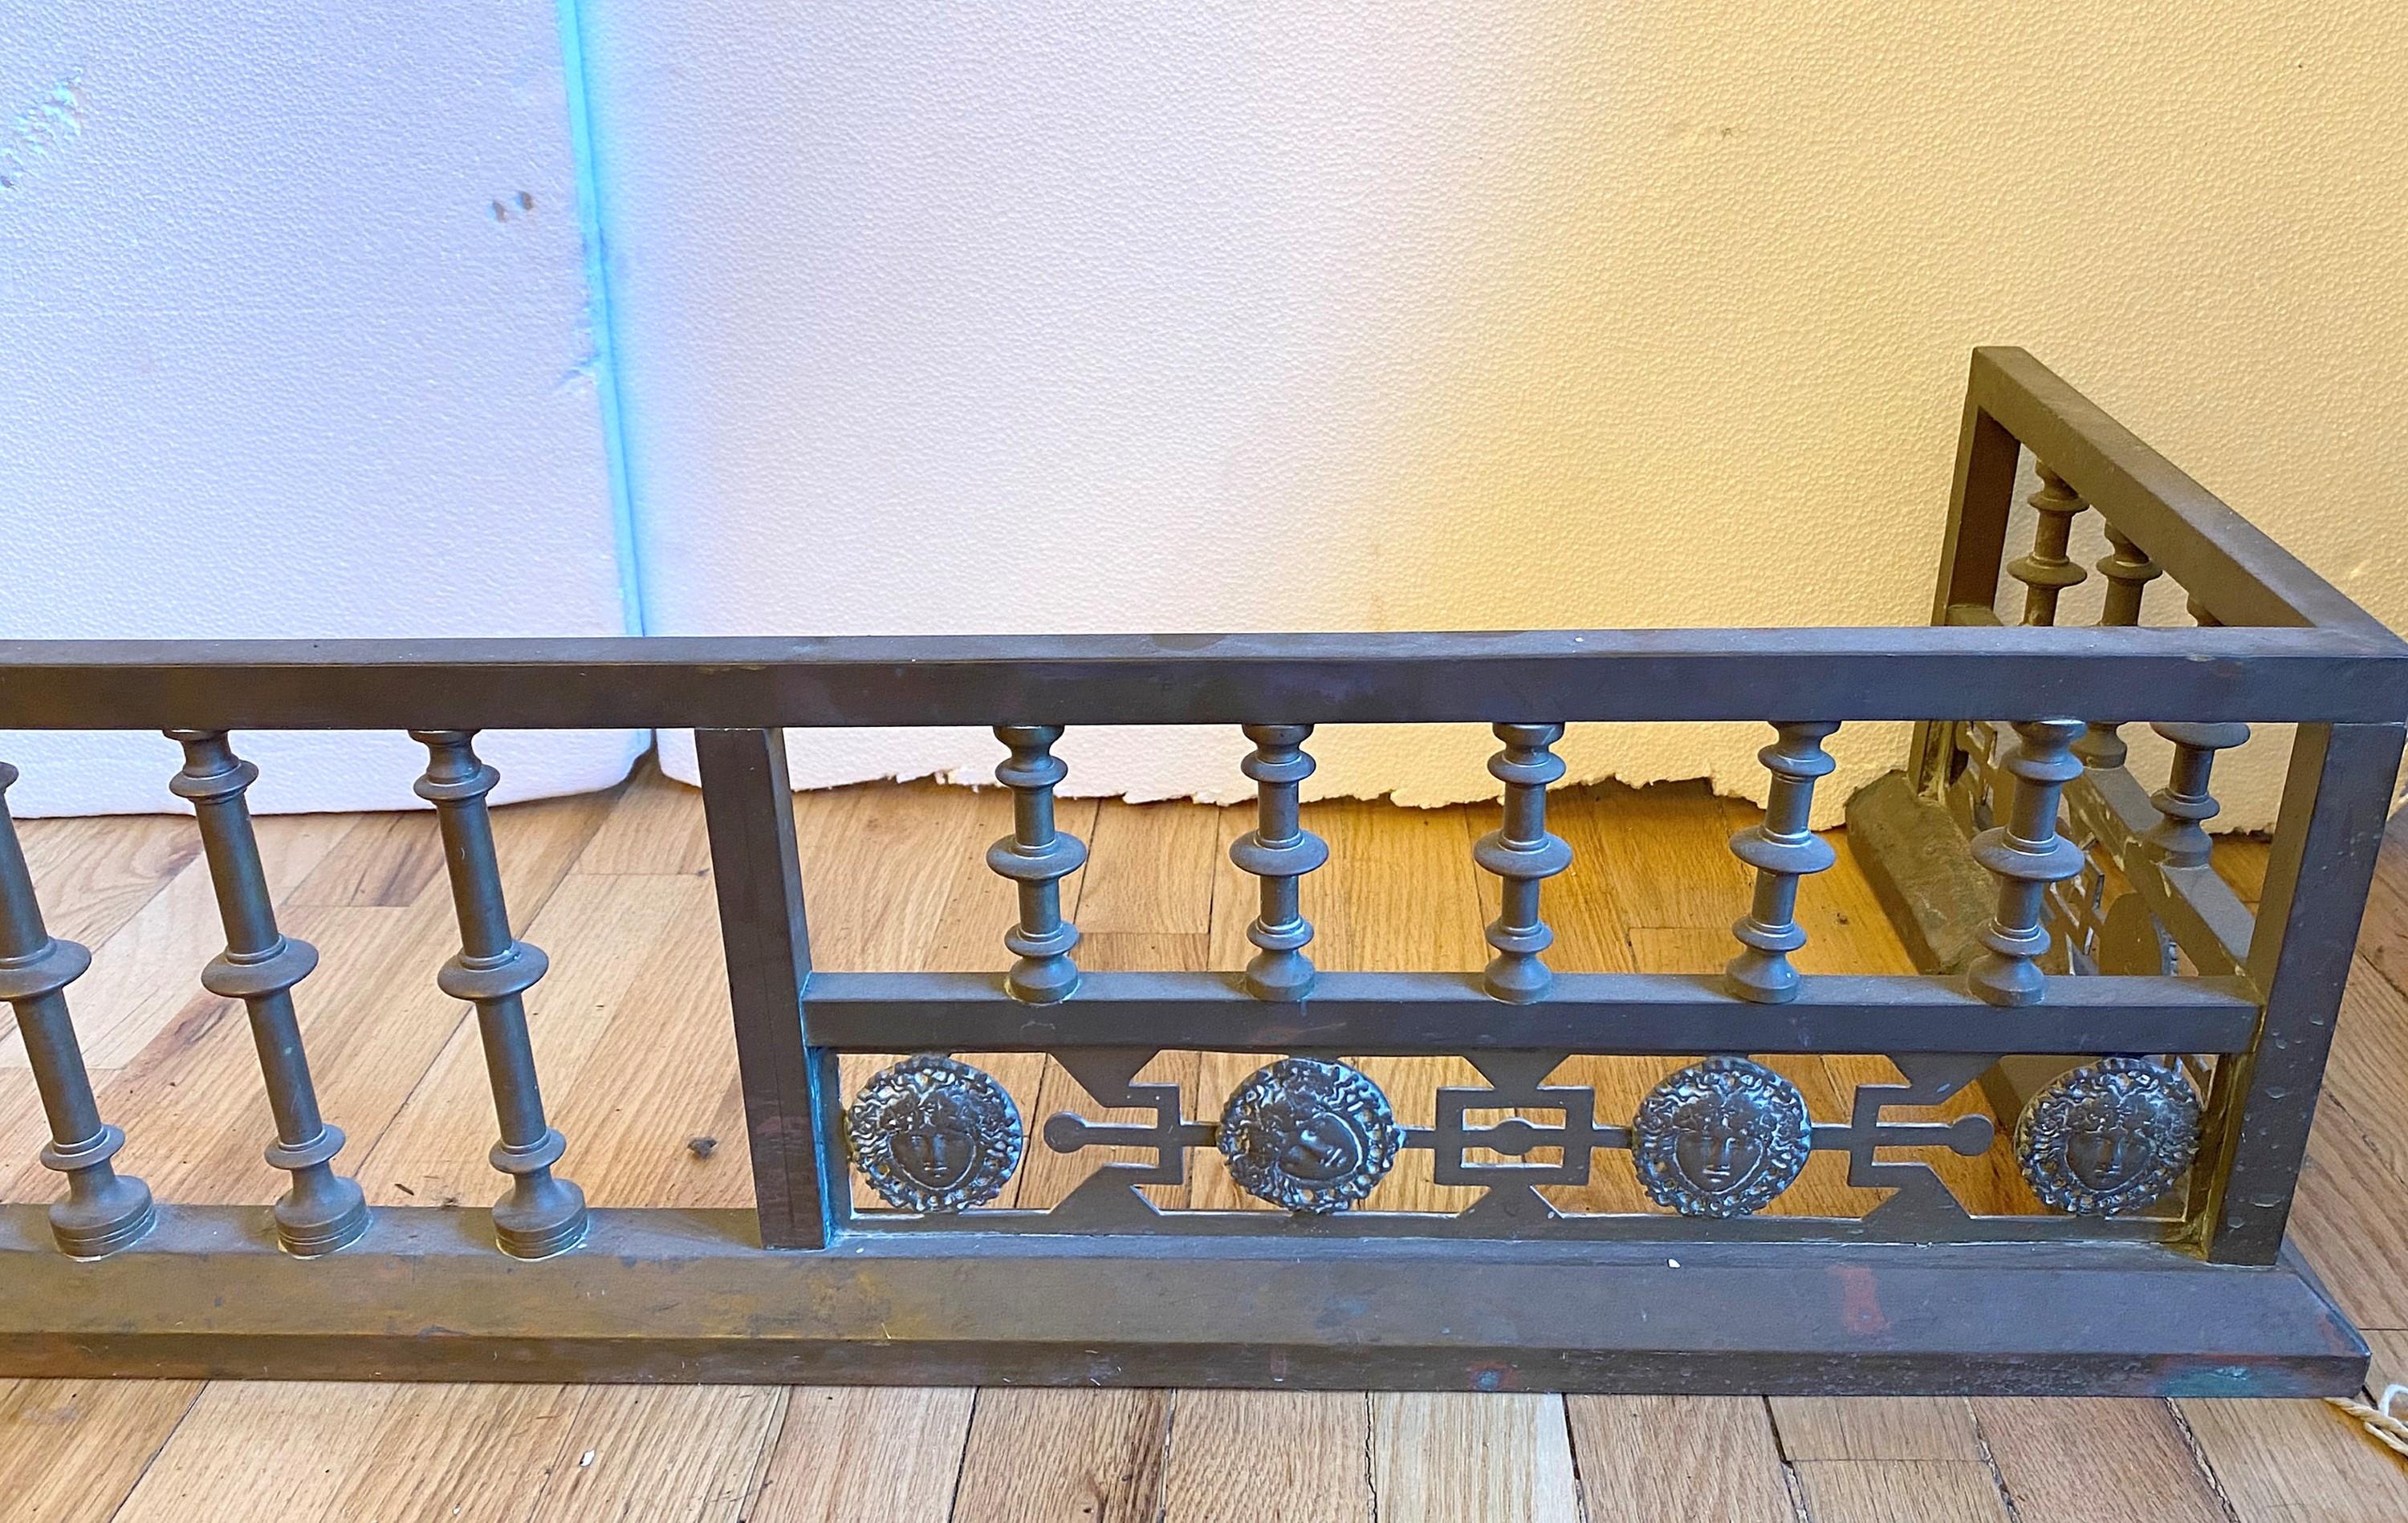 Early 20th century bronze fireplace fender. Features ornate sun faces around the bottom. Geometric design. Please note, this item is located in one of our NYC locations.